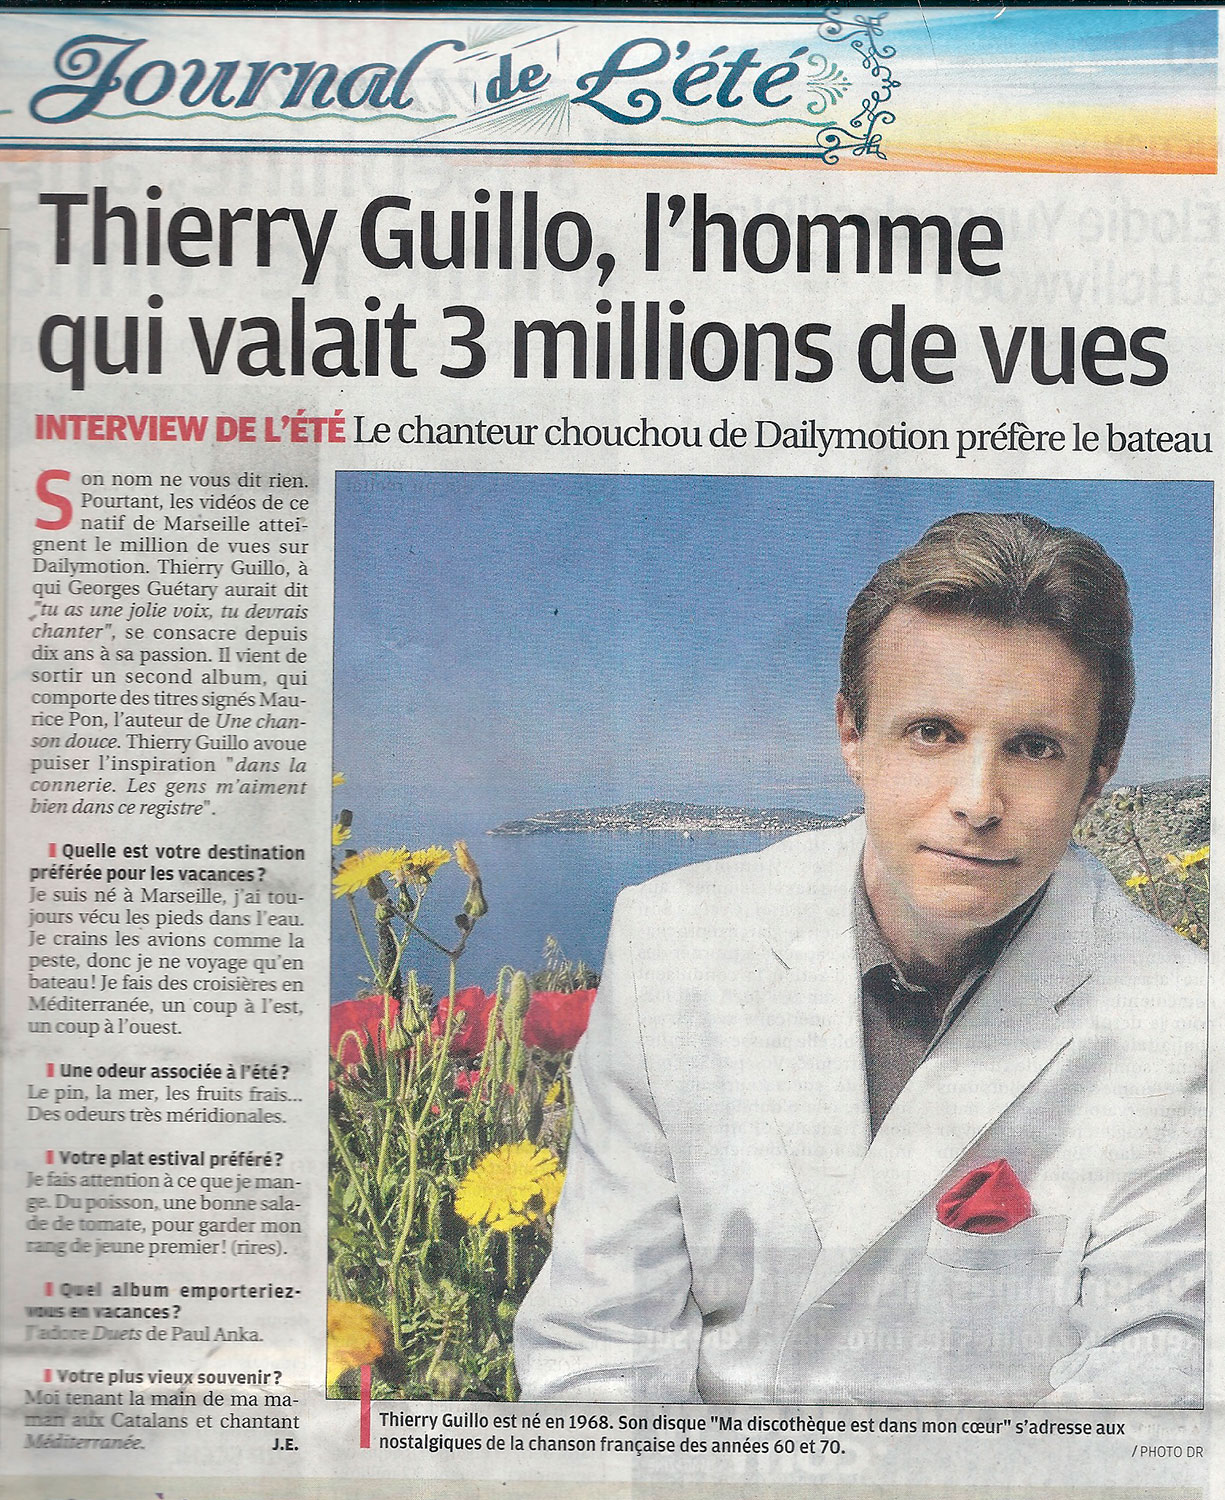 Thierry Guillo